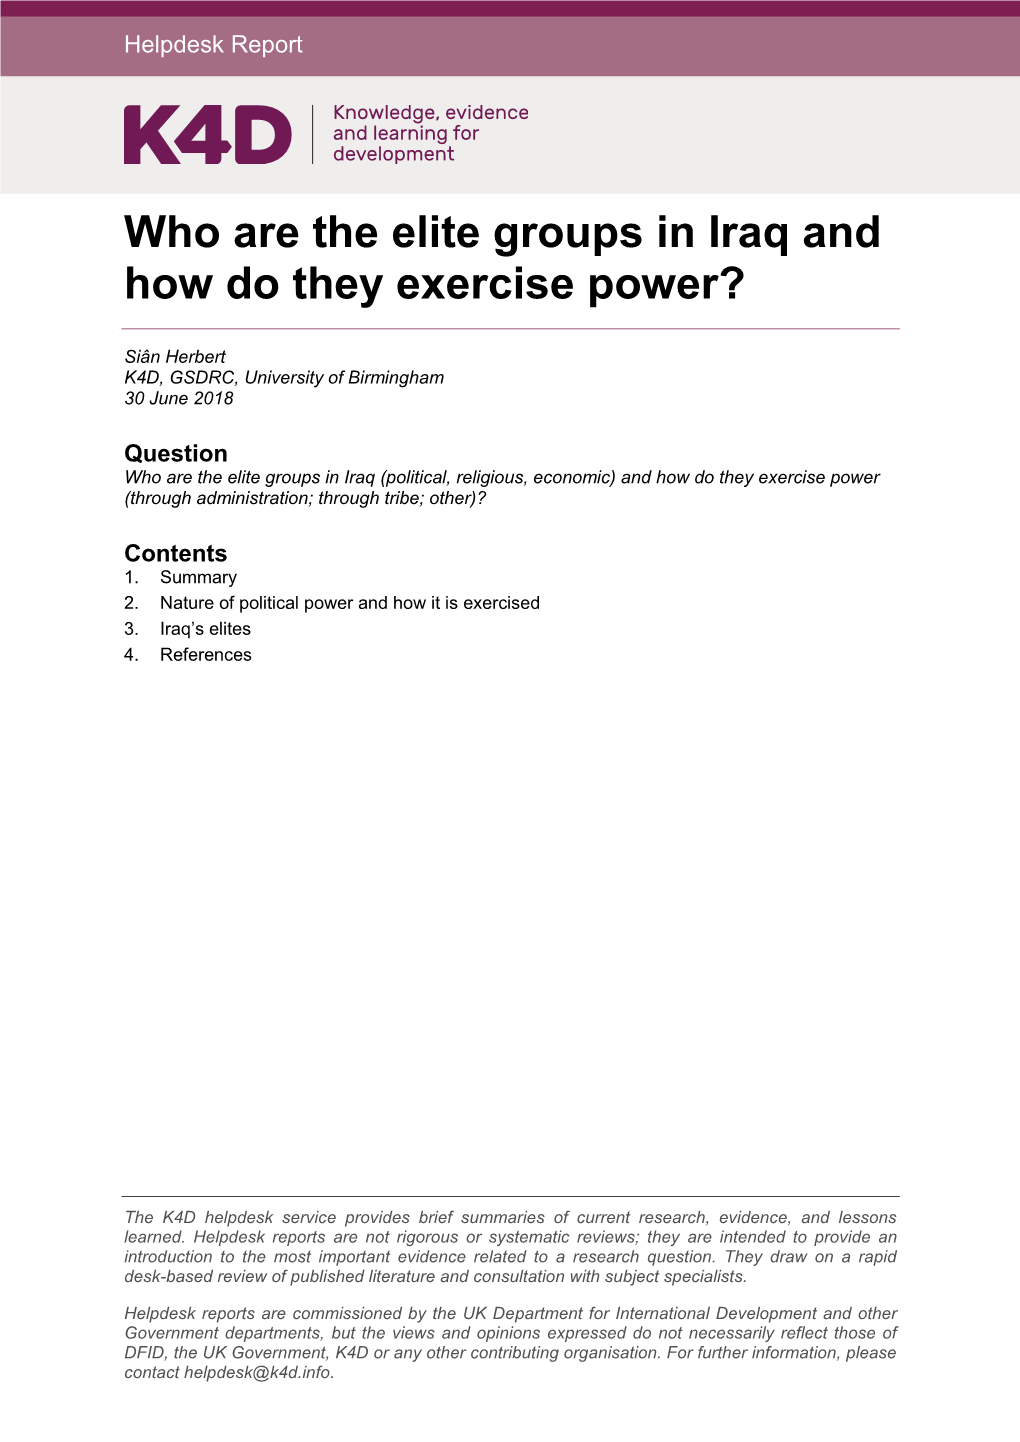 Who Are the Elite Groups in Iraq and How Do They Exercise Power?